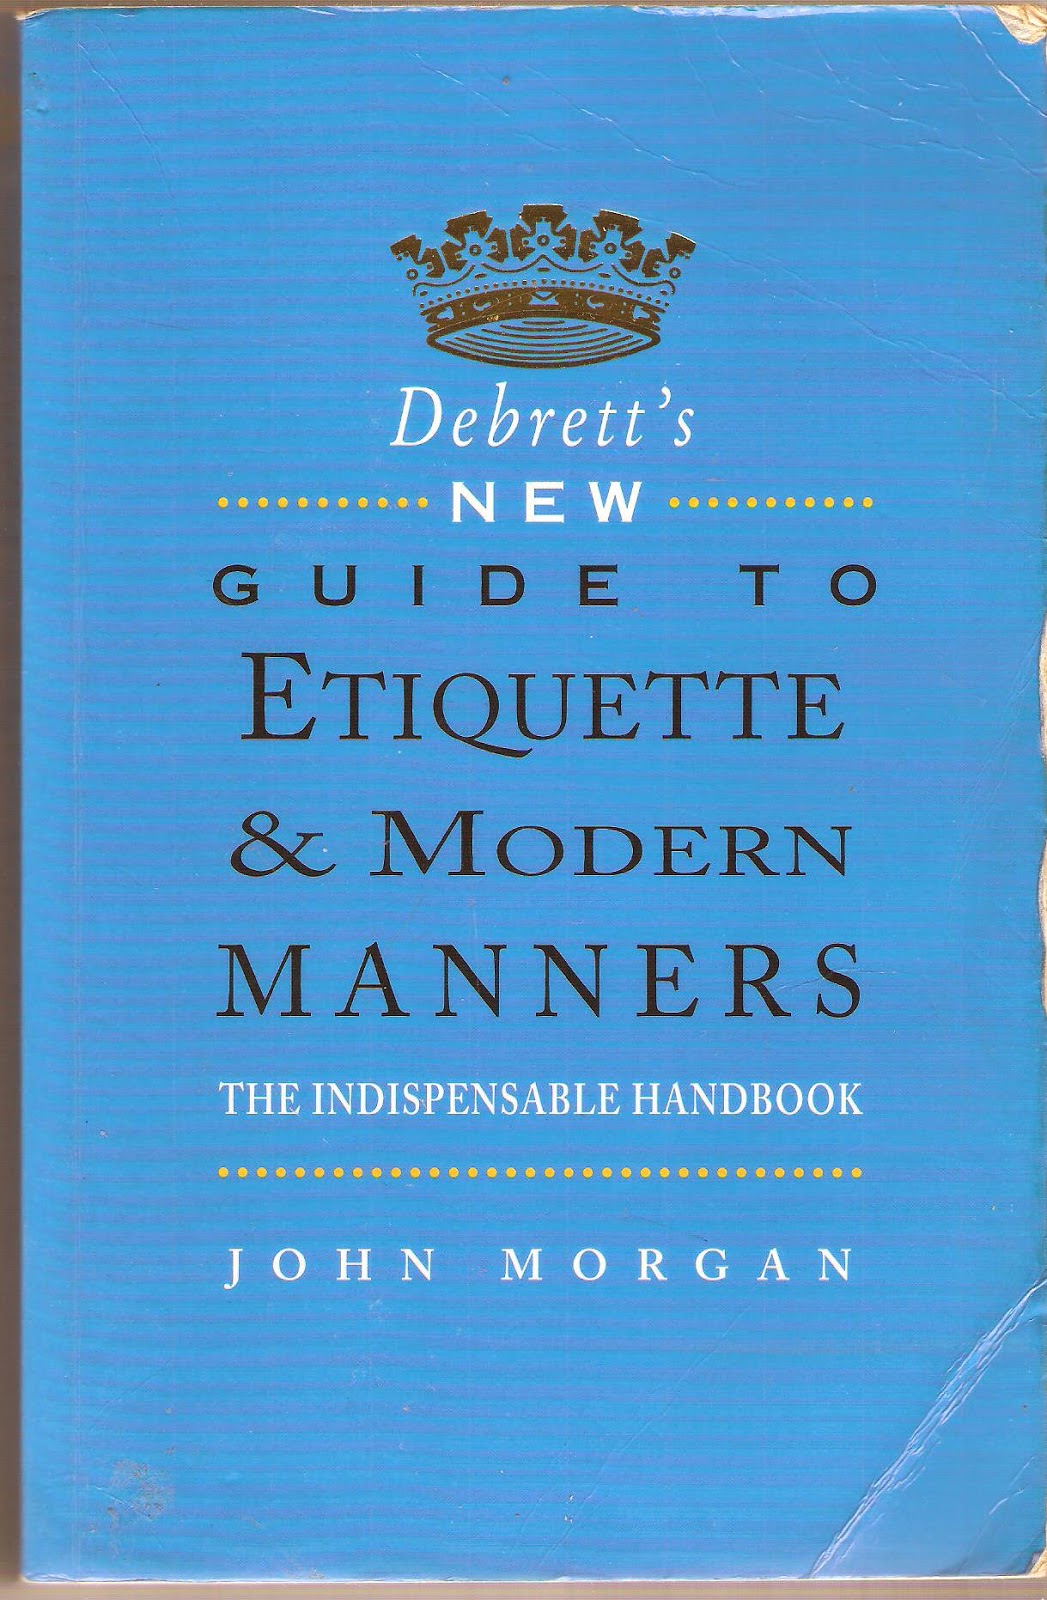 Debrett's Guide to Etiquette and Modern Manners